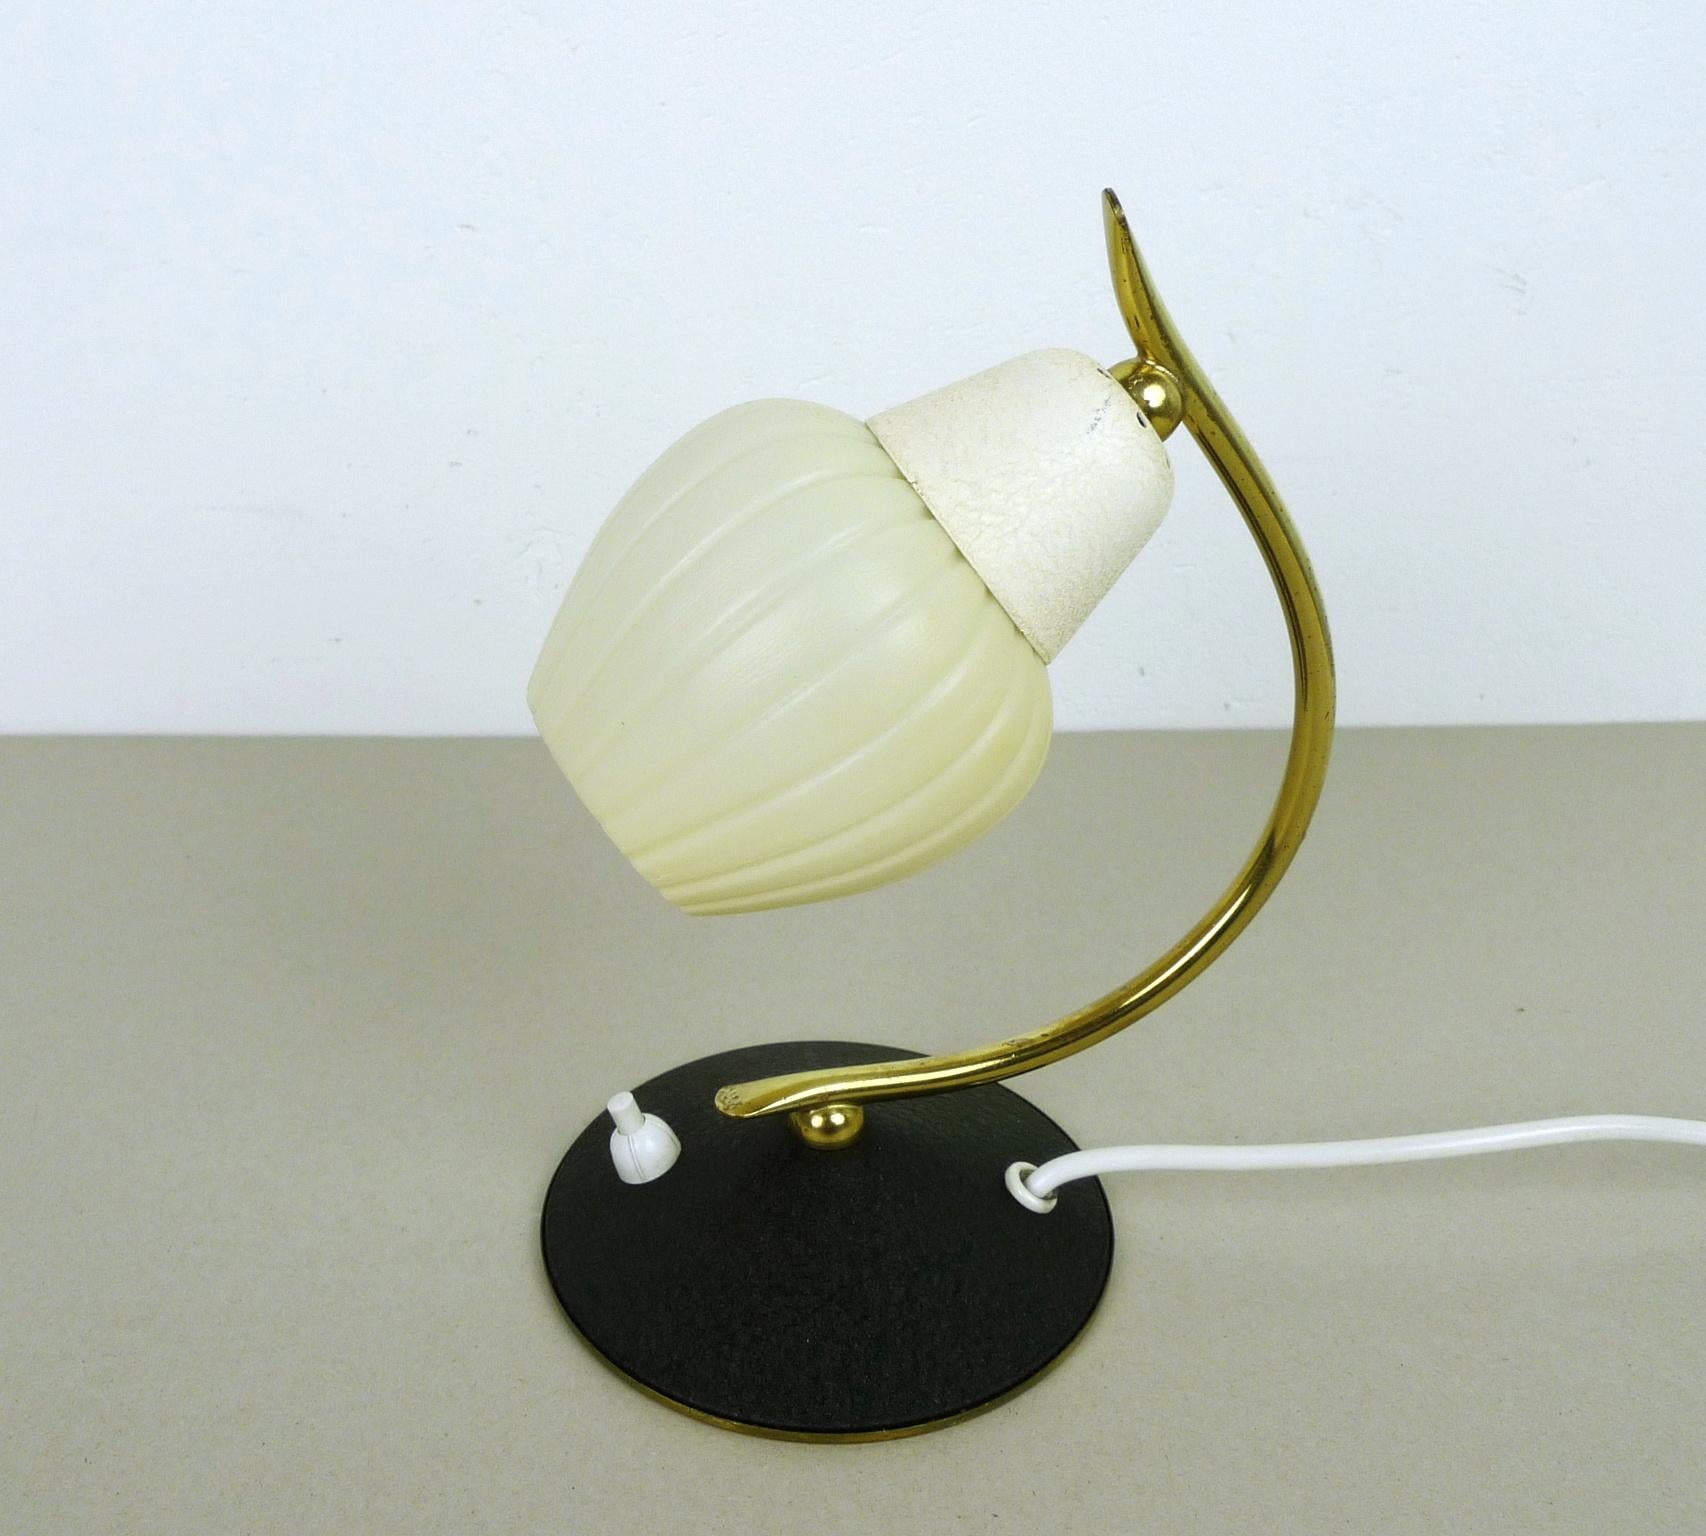 Small bedside lamp from the 1950s with a white plastic shade on a brass handle on a round, black-lacquered stand. The bedside lamp has a pressure switch on the Stand and is operated with an E 14 lamp socket. The lamp is in good vintage condition.